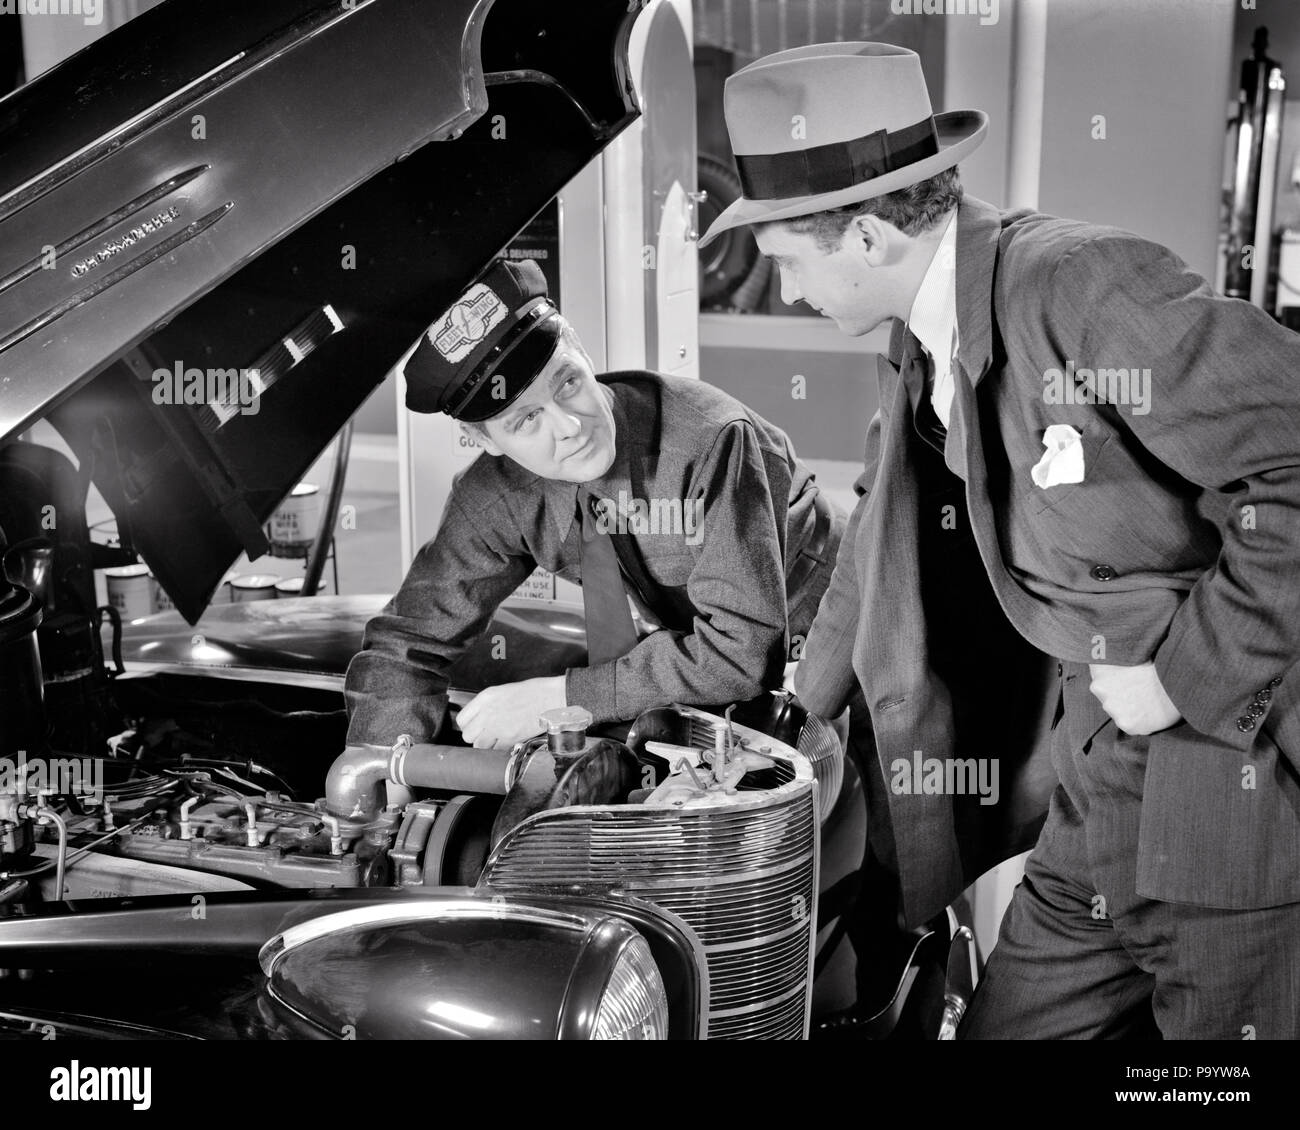 1930s 1940s AUTO MECHANIC EXPLAINING PROBLEM WITH ENGINE TO CAR OWNER  - m2940 HAR001 HARS COPY SPACE HALF-LENGTH PERSONS AUTOMOBILE CARING MALES FIXING TRANSPORTATION MIDDLE-AGED B&W MIDDLE-AGED MAN SKILL SUIT AND TIE OCCUPATION SKILLS EXPLAINING OWNER CUSTOMER SERVICE SERVICE STATION OCCUPATIONS REPAIRING AUTOMOBILES SUPPORT VEHICLES MID-ADULT MID-ADULT MAN SOLUTIONS BLACK AND WHITE CAUCASIAN ETHNICITY HAR001 OLD FASHIONED Stock Photo